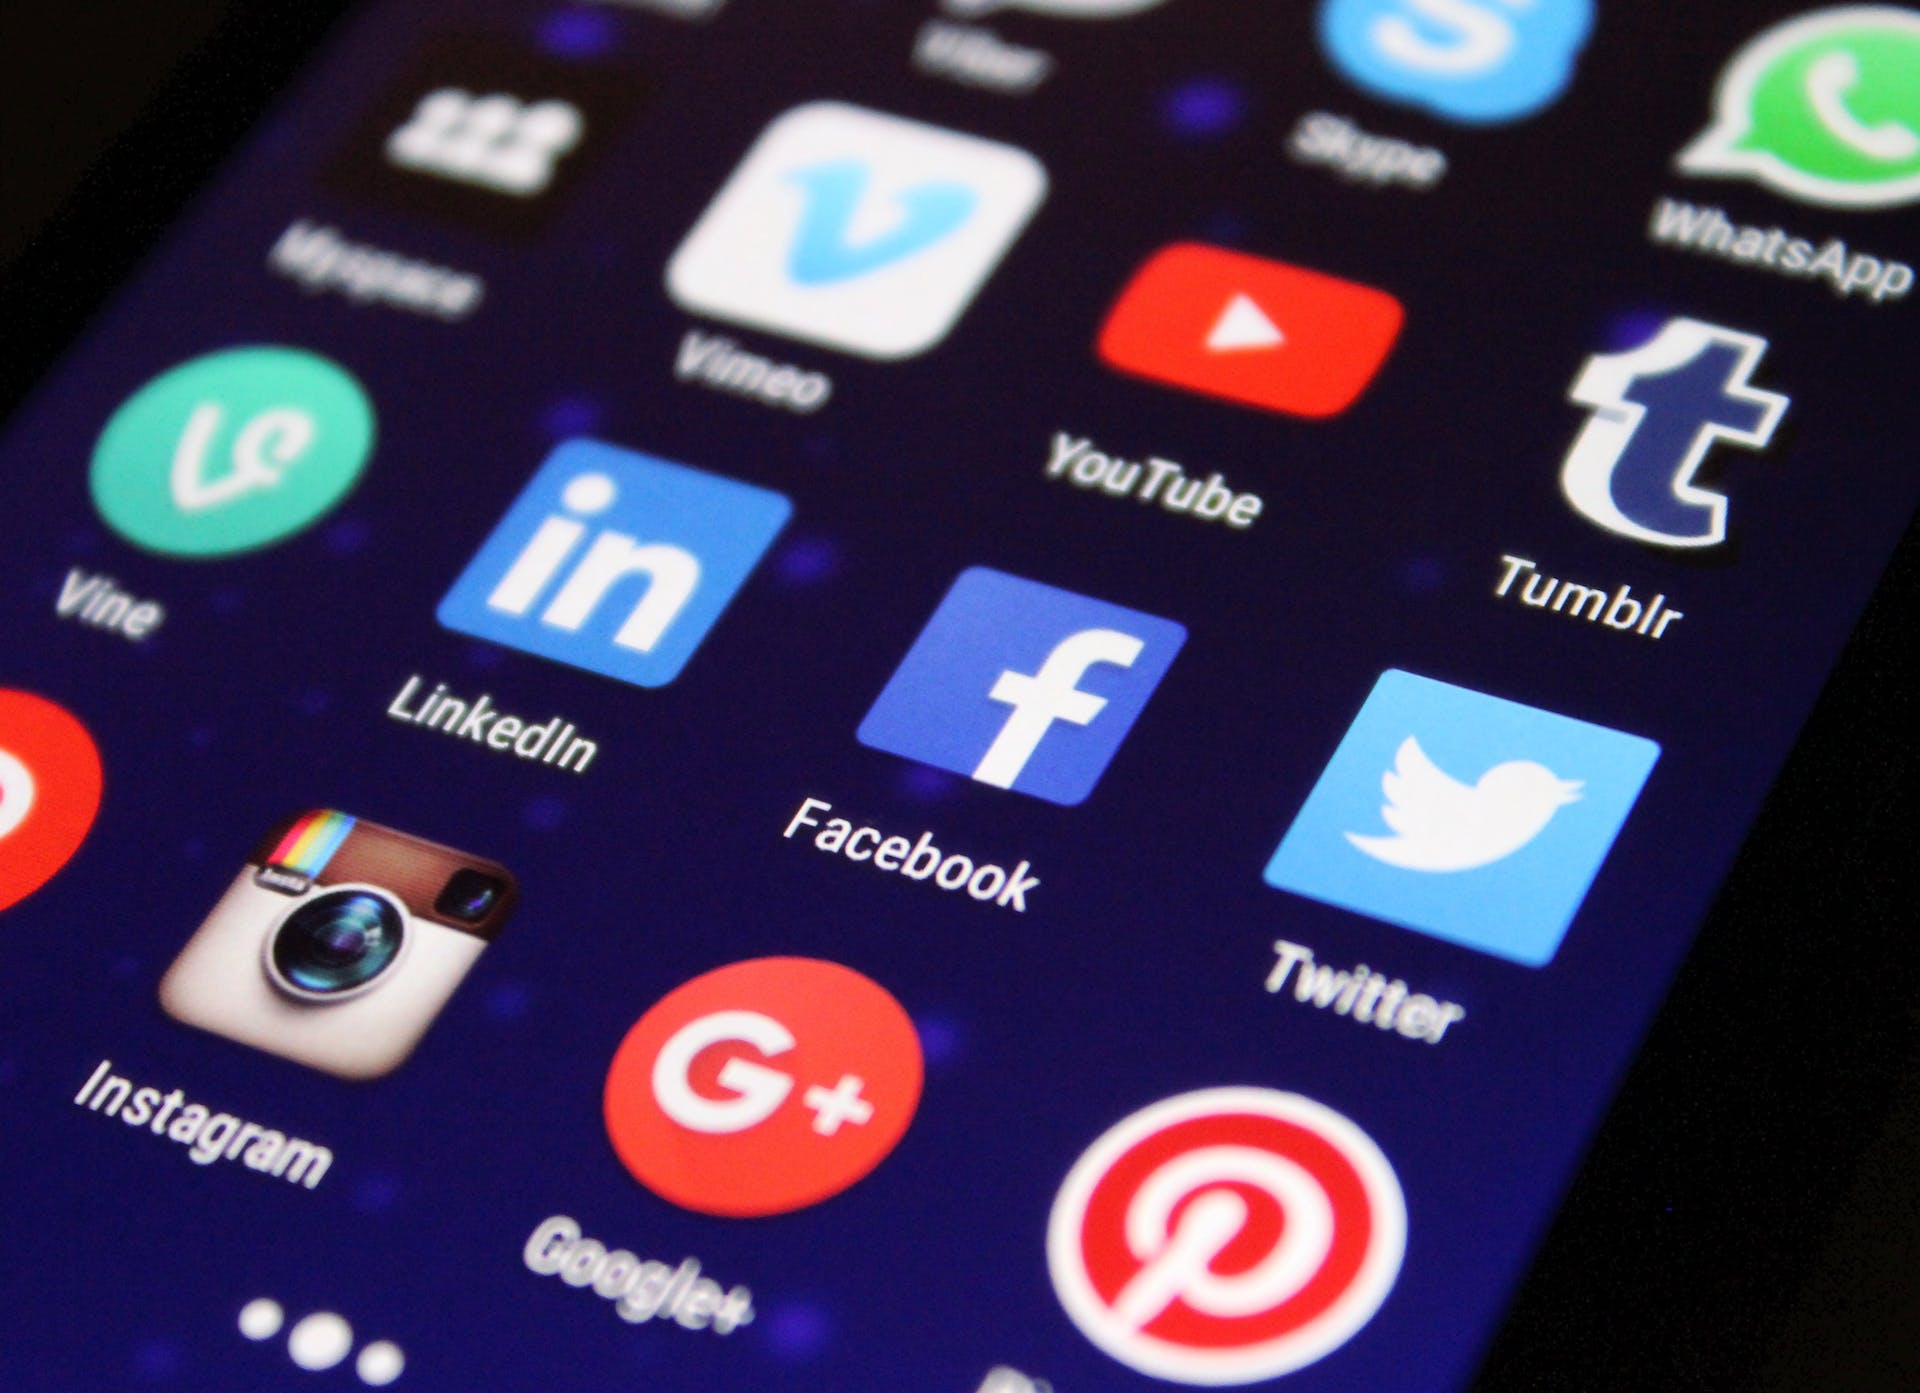 A close-up view of social media icons | Source: Pexels